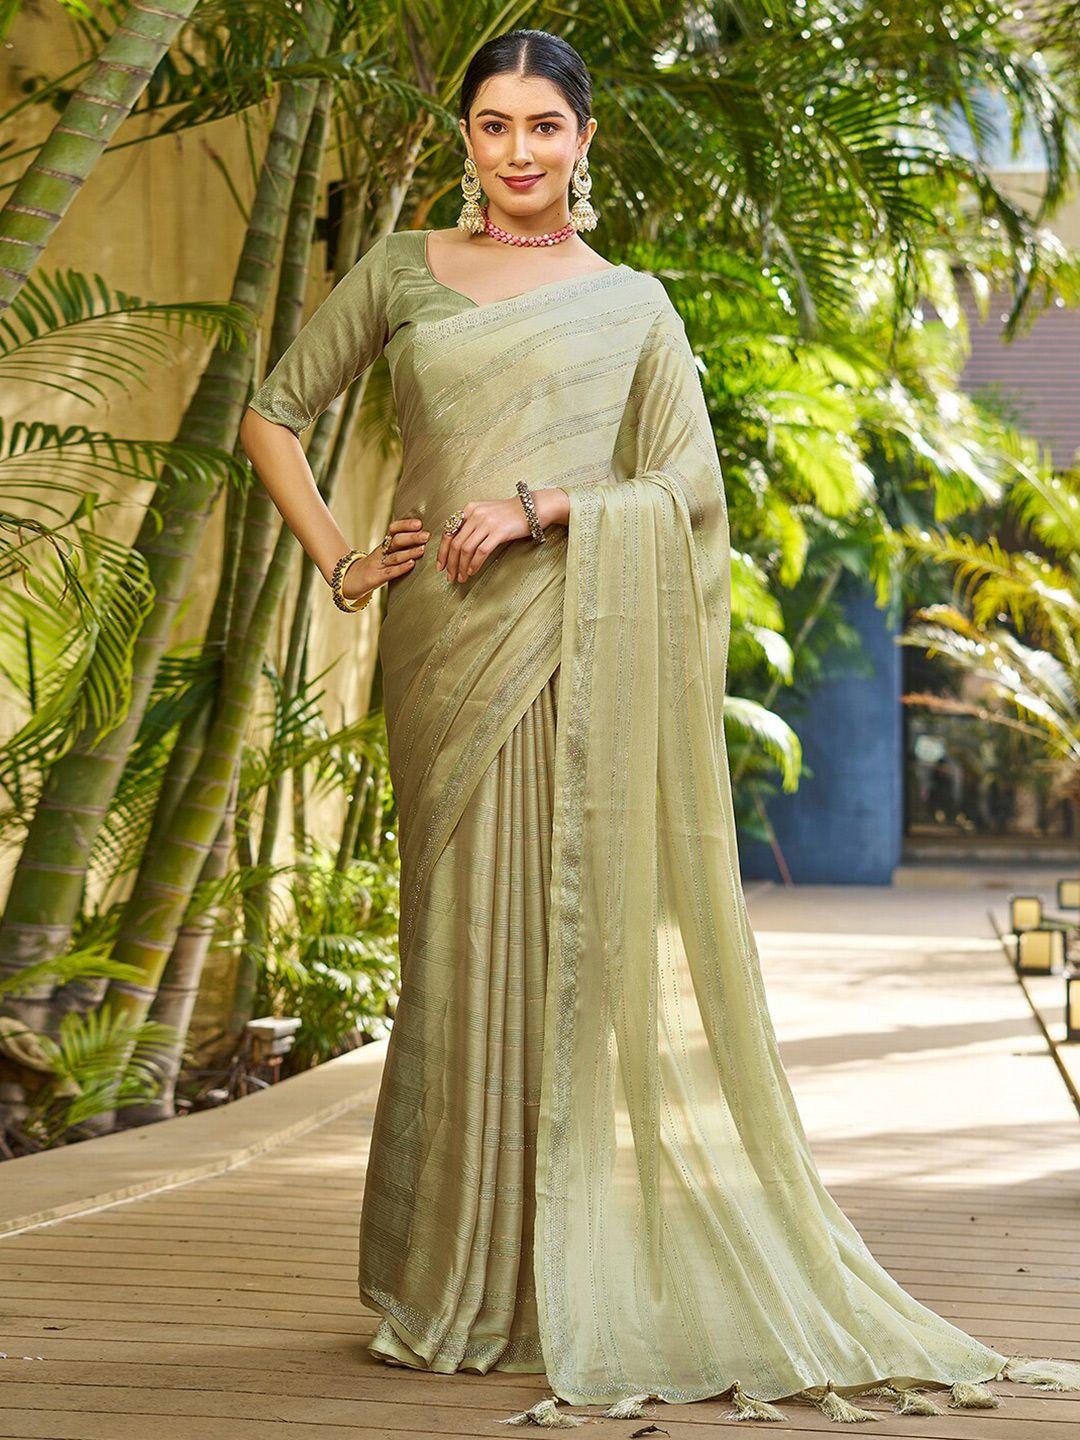 mitera beige striped beads and stones embellished saree